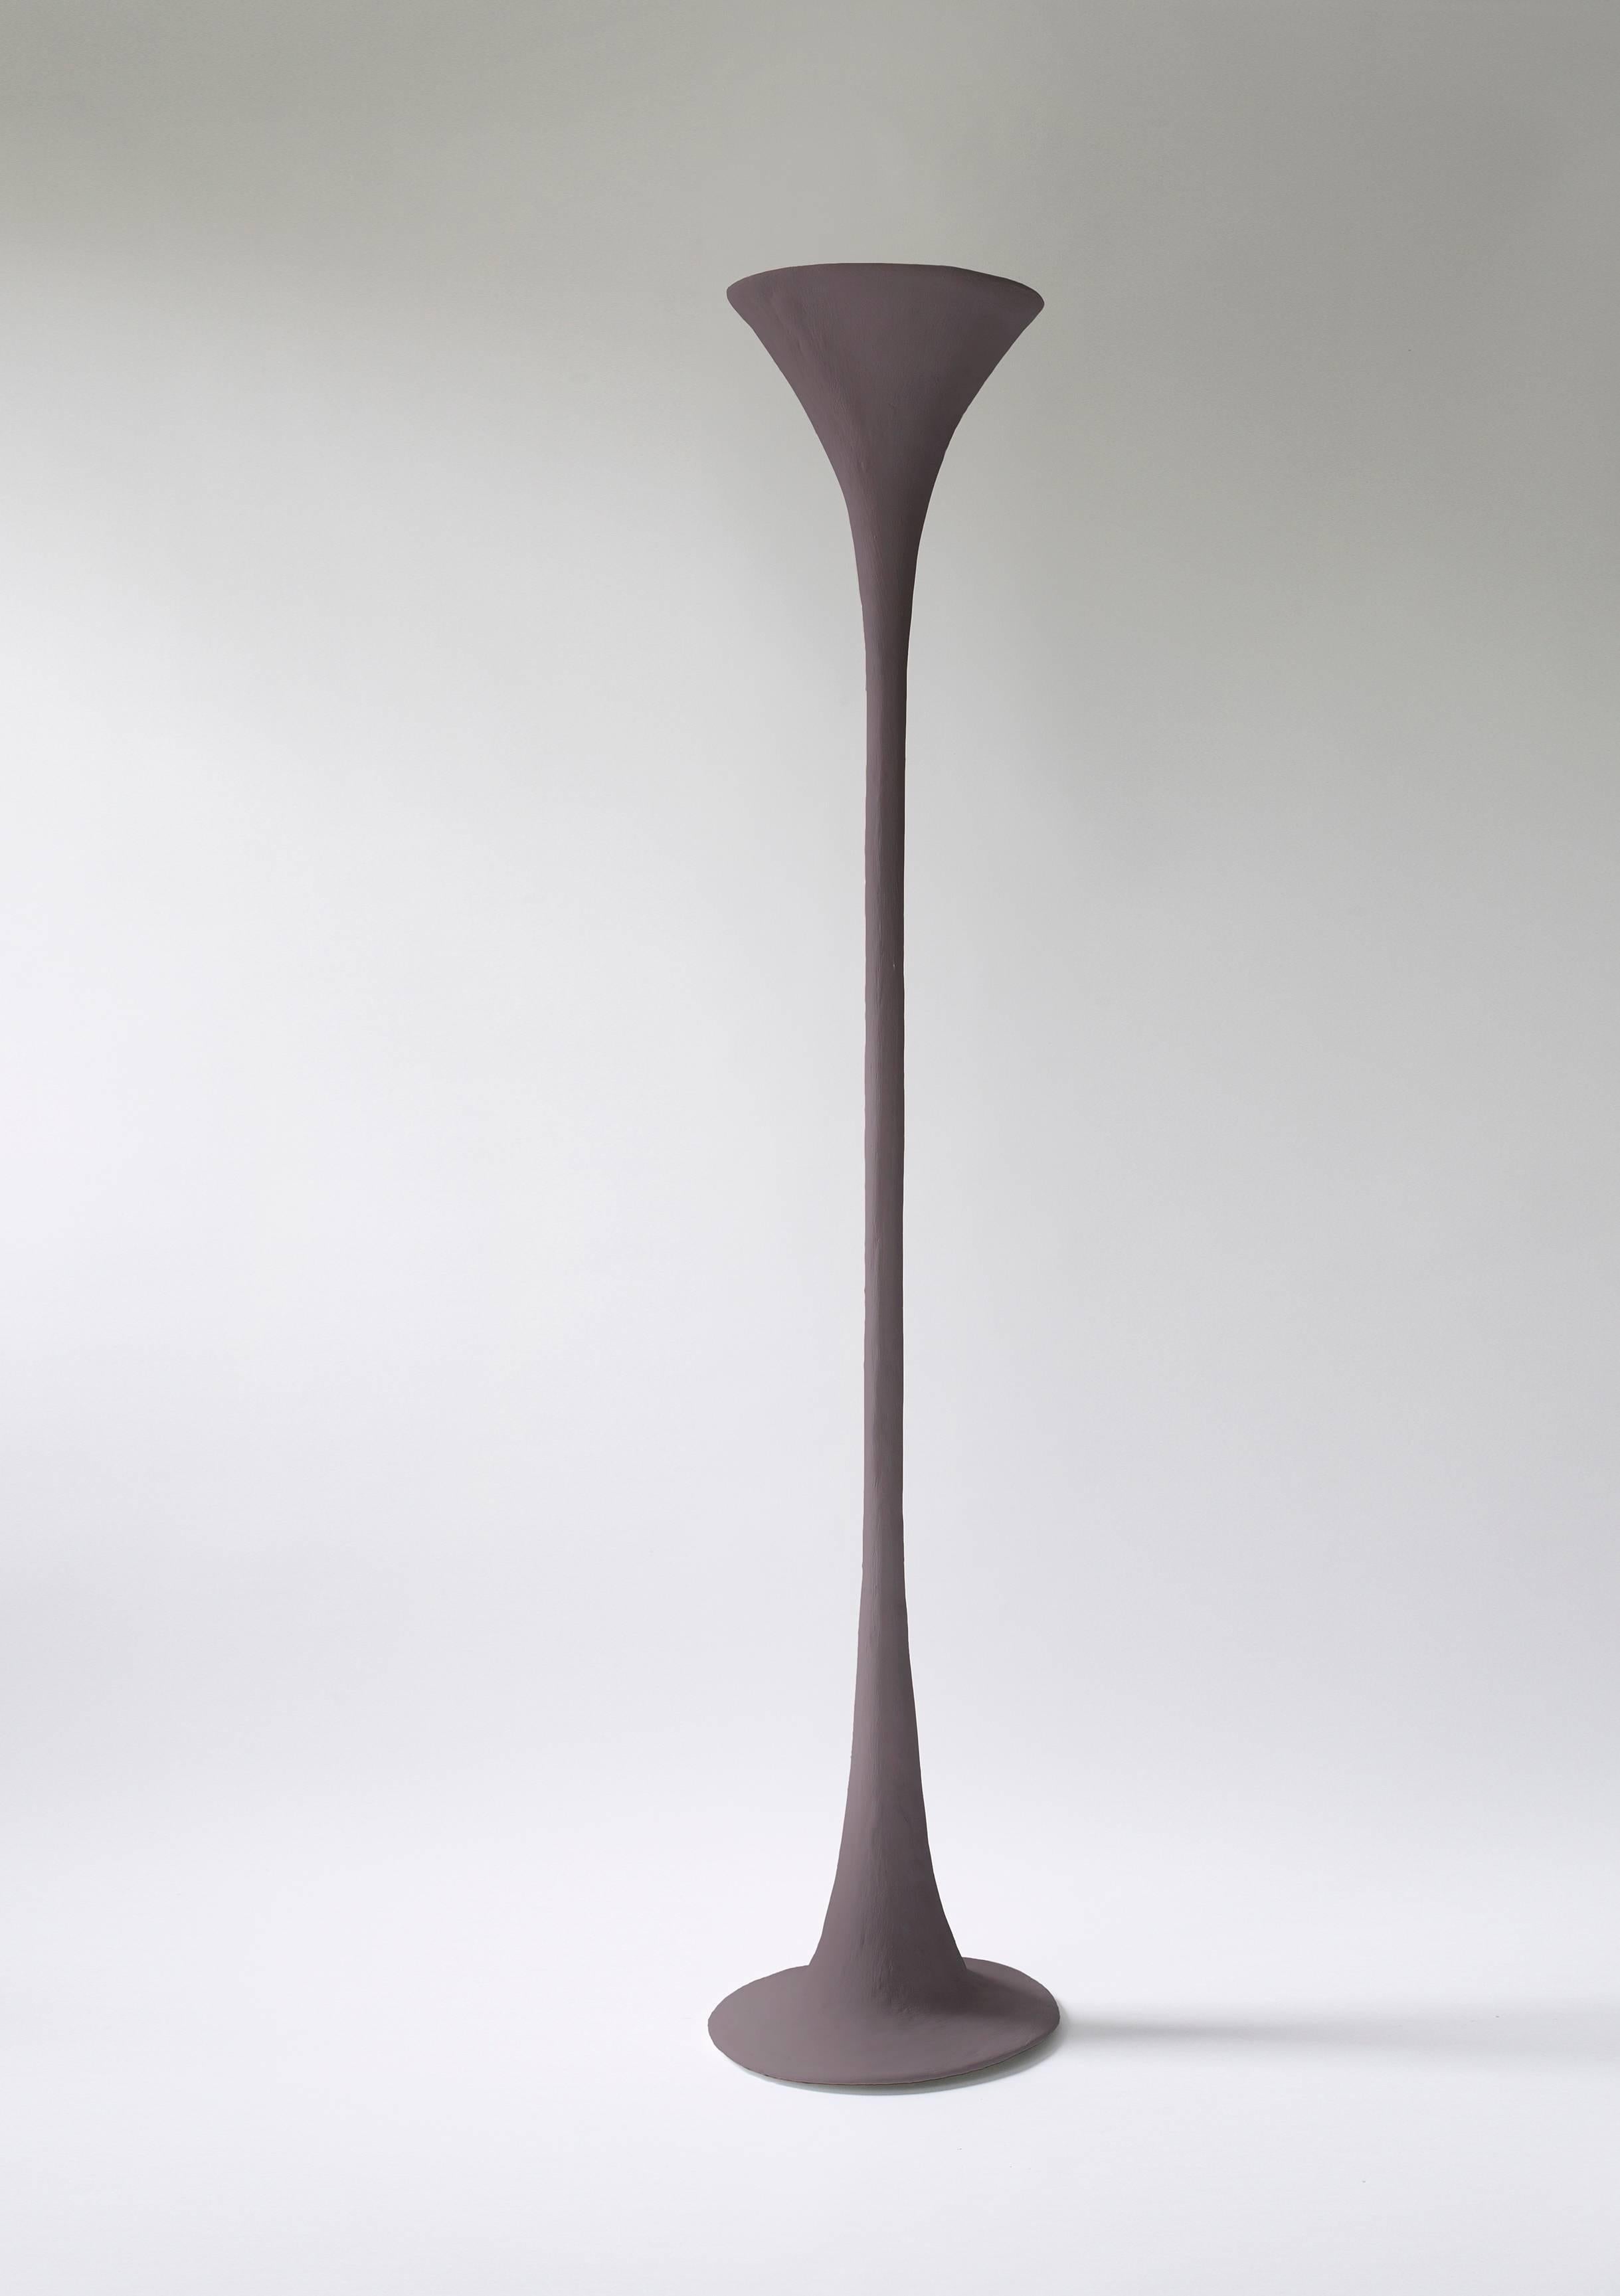 Referencing the historical lighting forms of Alberto and Diego Giacometti, this sculptural floor lamp has a quiet but distinct presence in any space. 

Shown Farrow & Ball Brown, the first in a series of new colors being introduced this